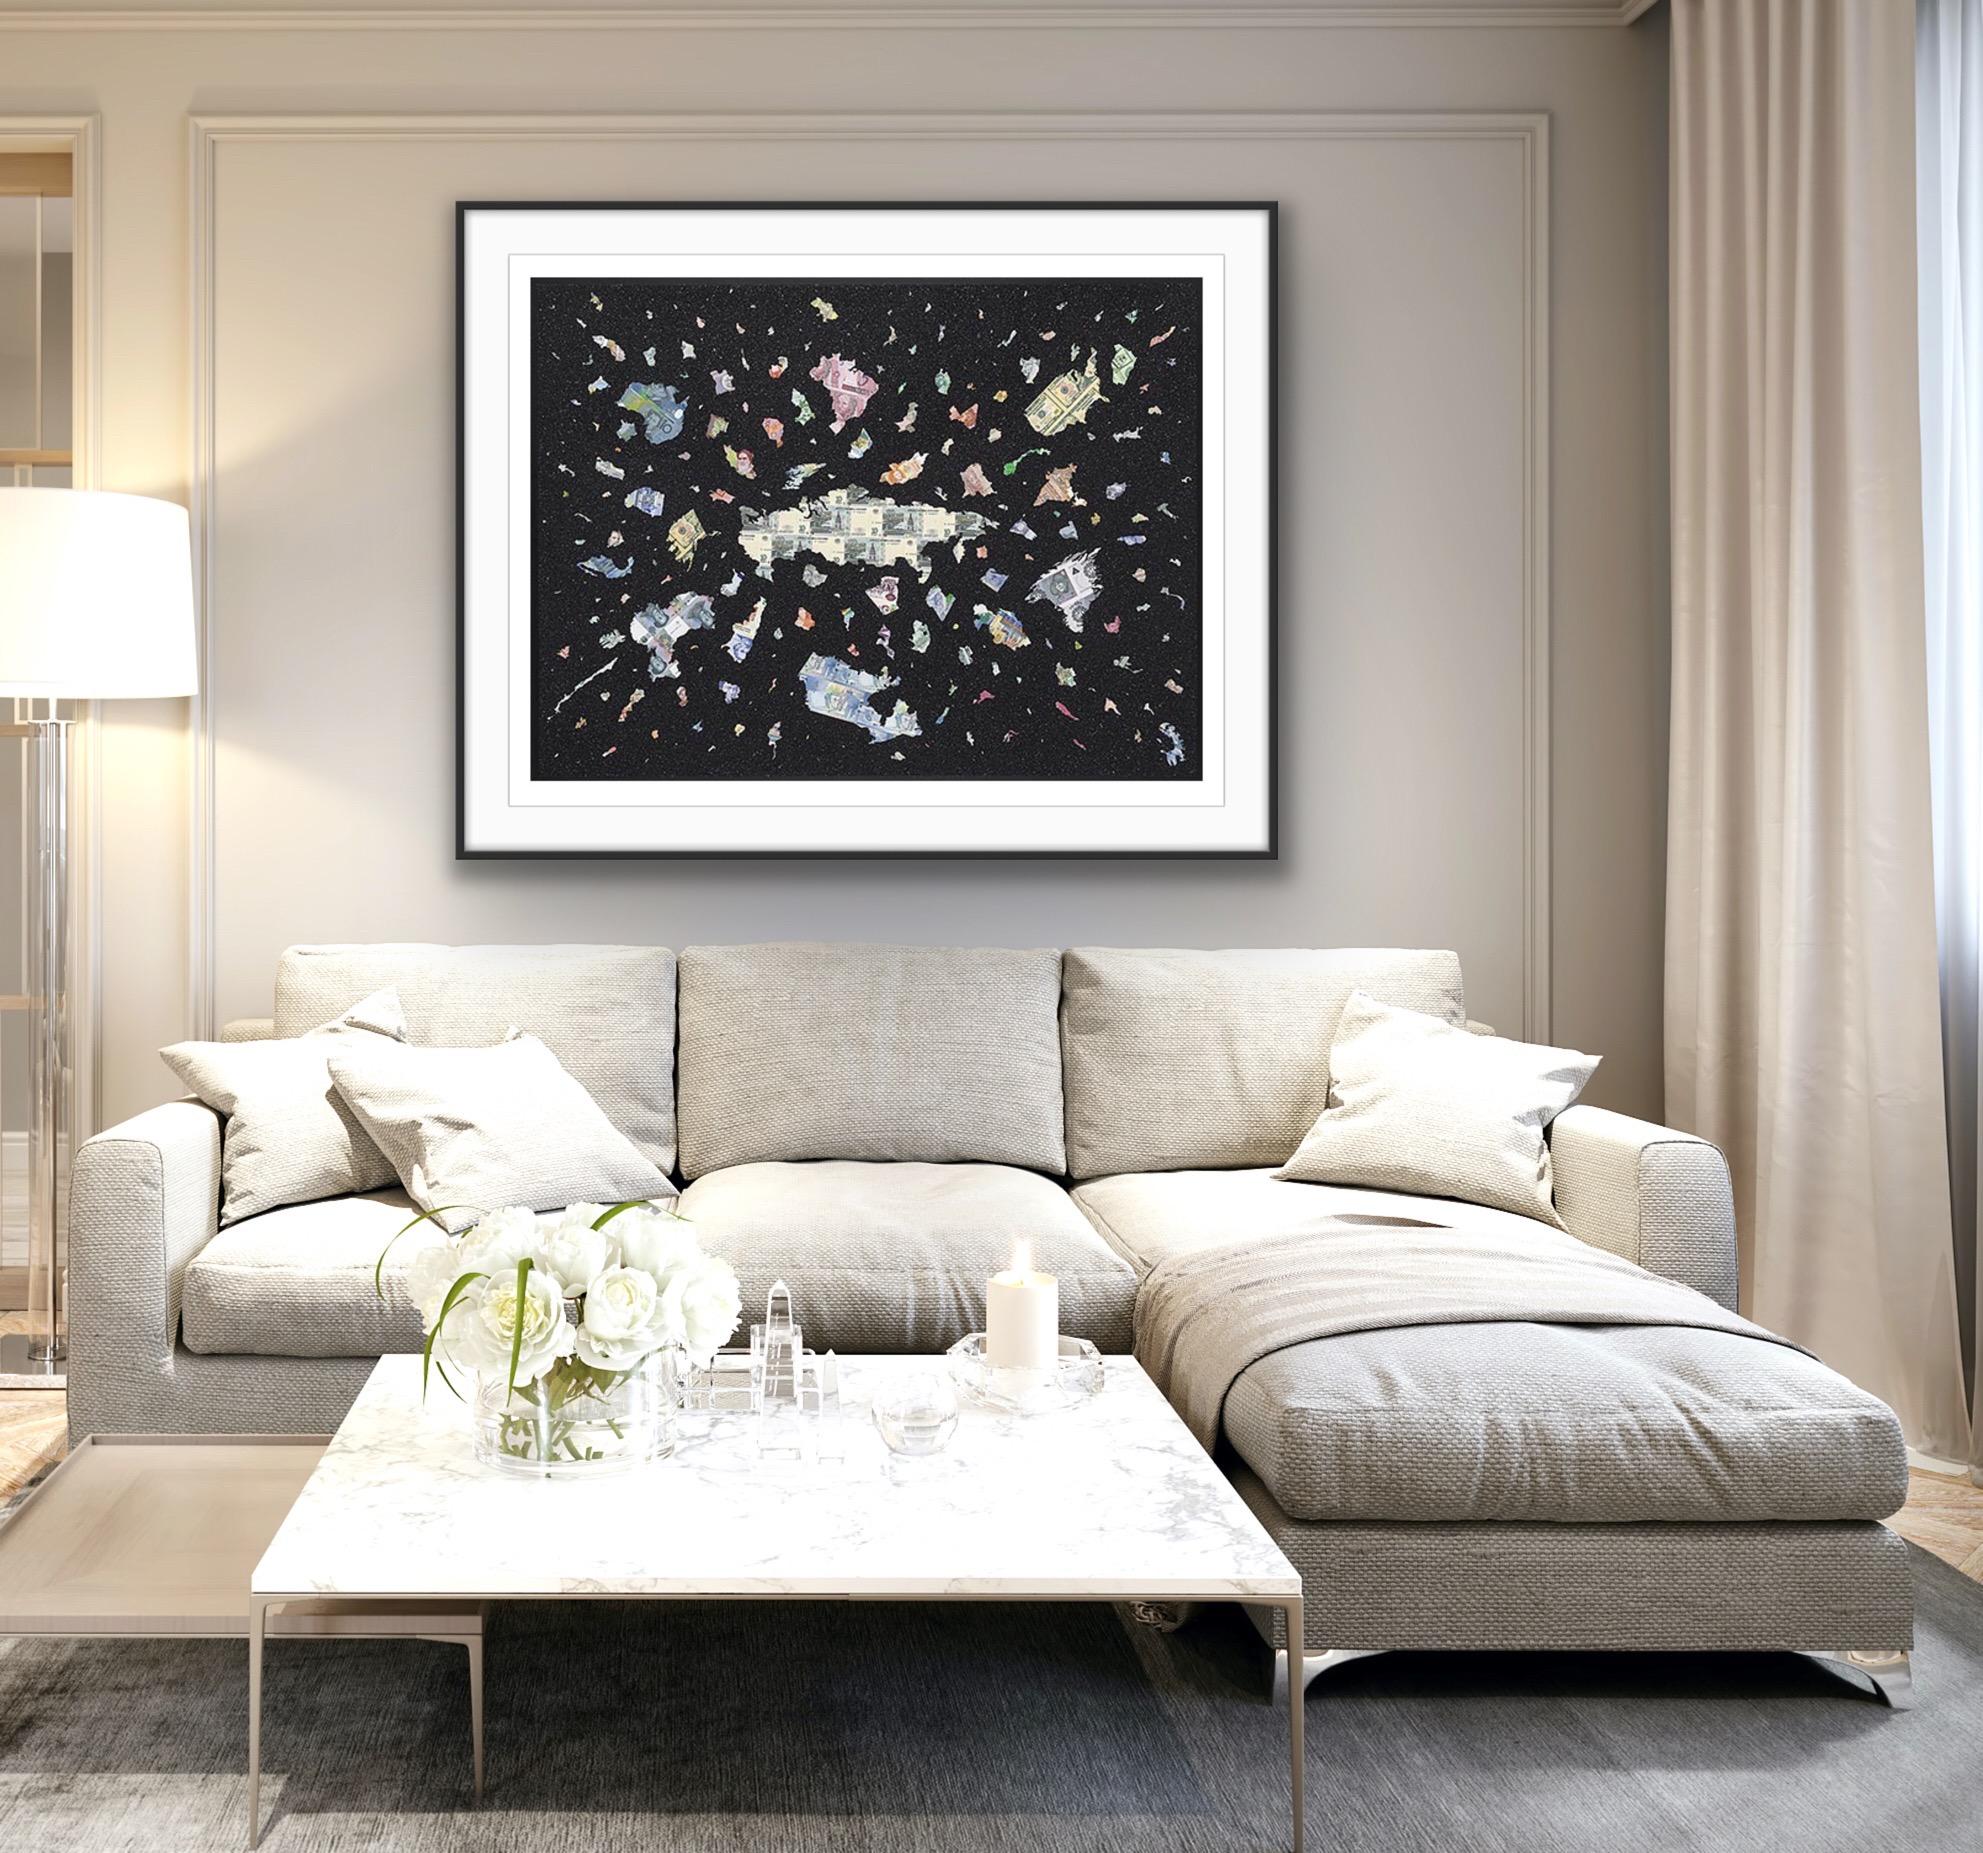 A Bigger Bang Black Diamond Dust, Contemporary Pop Art Astrological Map Art - Print by Justine Smith